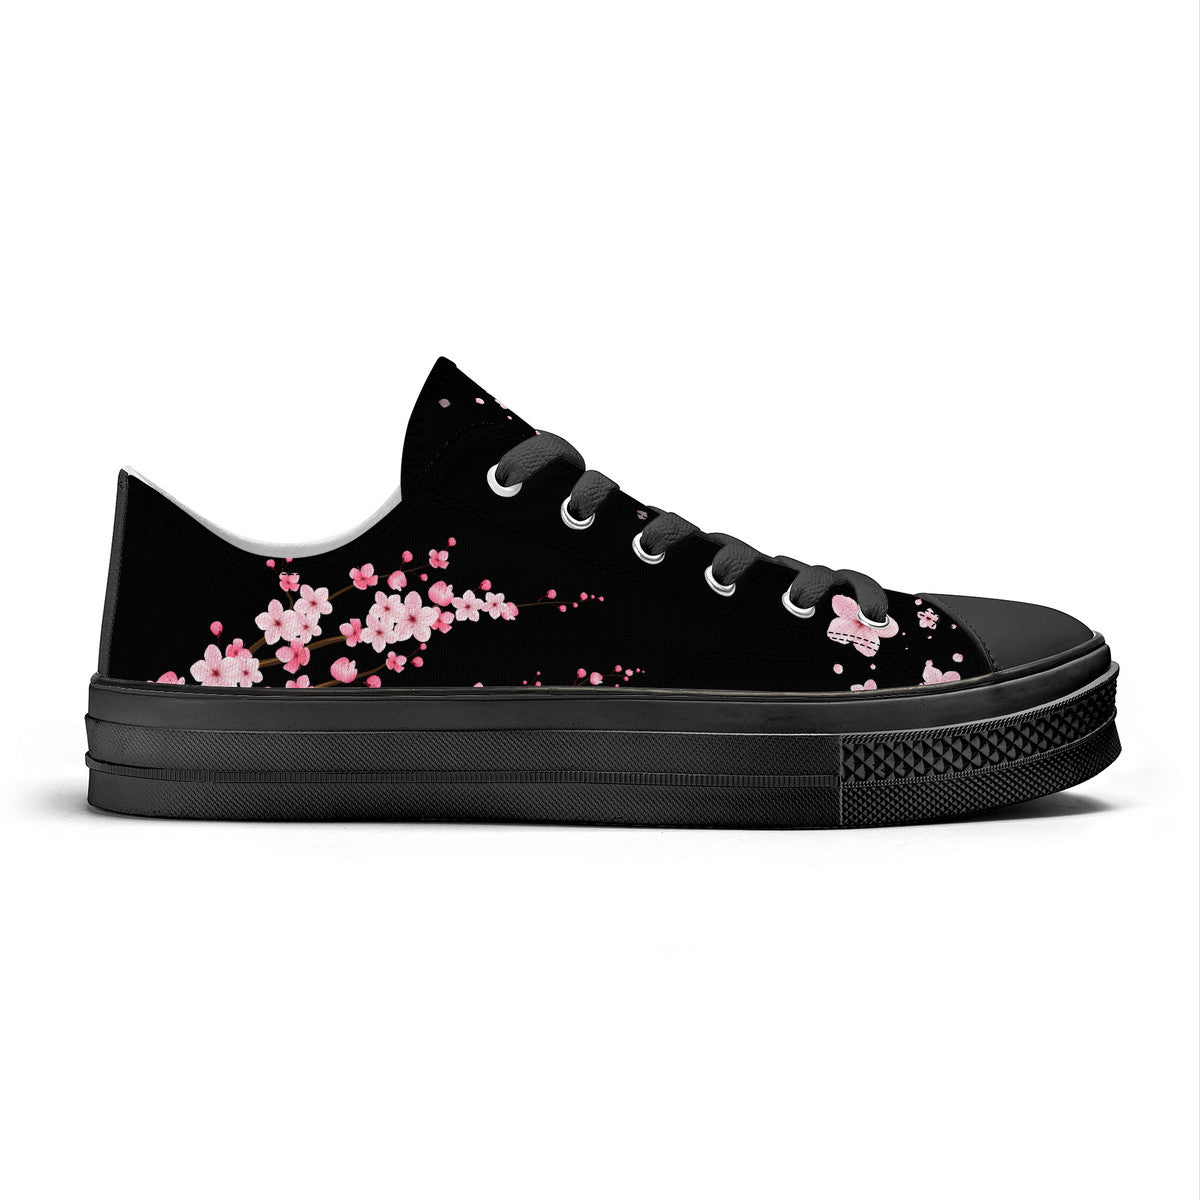 All Black Sakura Low Top Canvas Converse Style Shoes